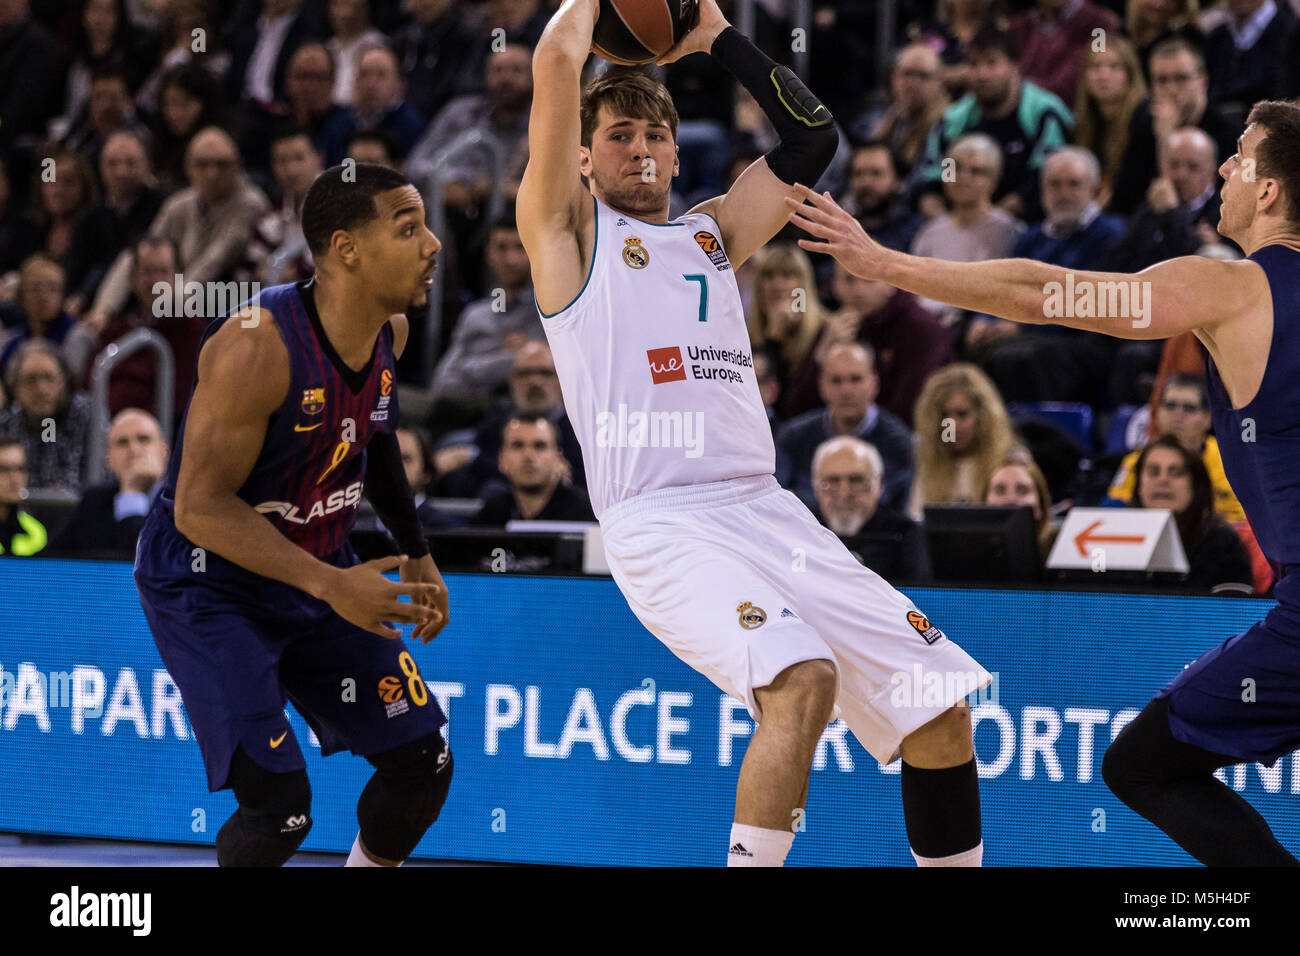 BARCELONA, SPAIN – FEBRUARY 23: Luka Doncic, #7 of Real Madrid in action  during the Turkish Airlines EuroLeague match between FC Barcelona Lassa and Real  Madrid at Palau Balugrana on February 23,